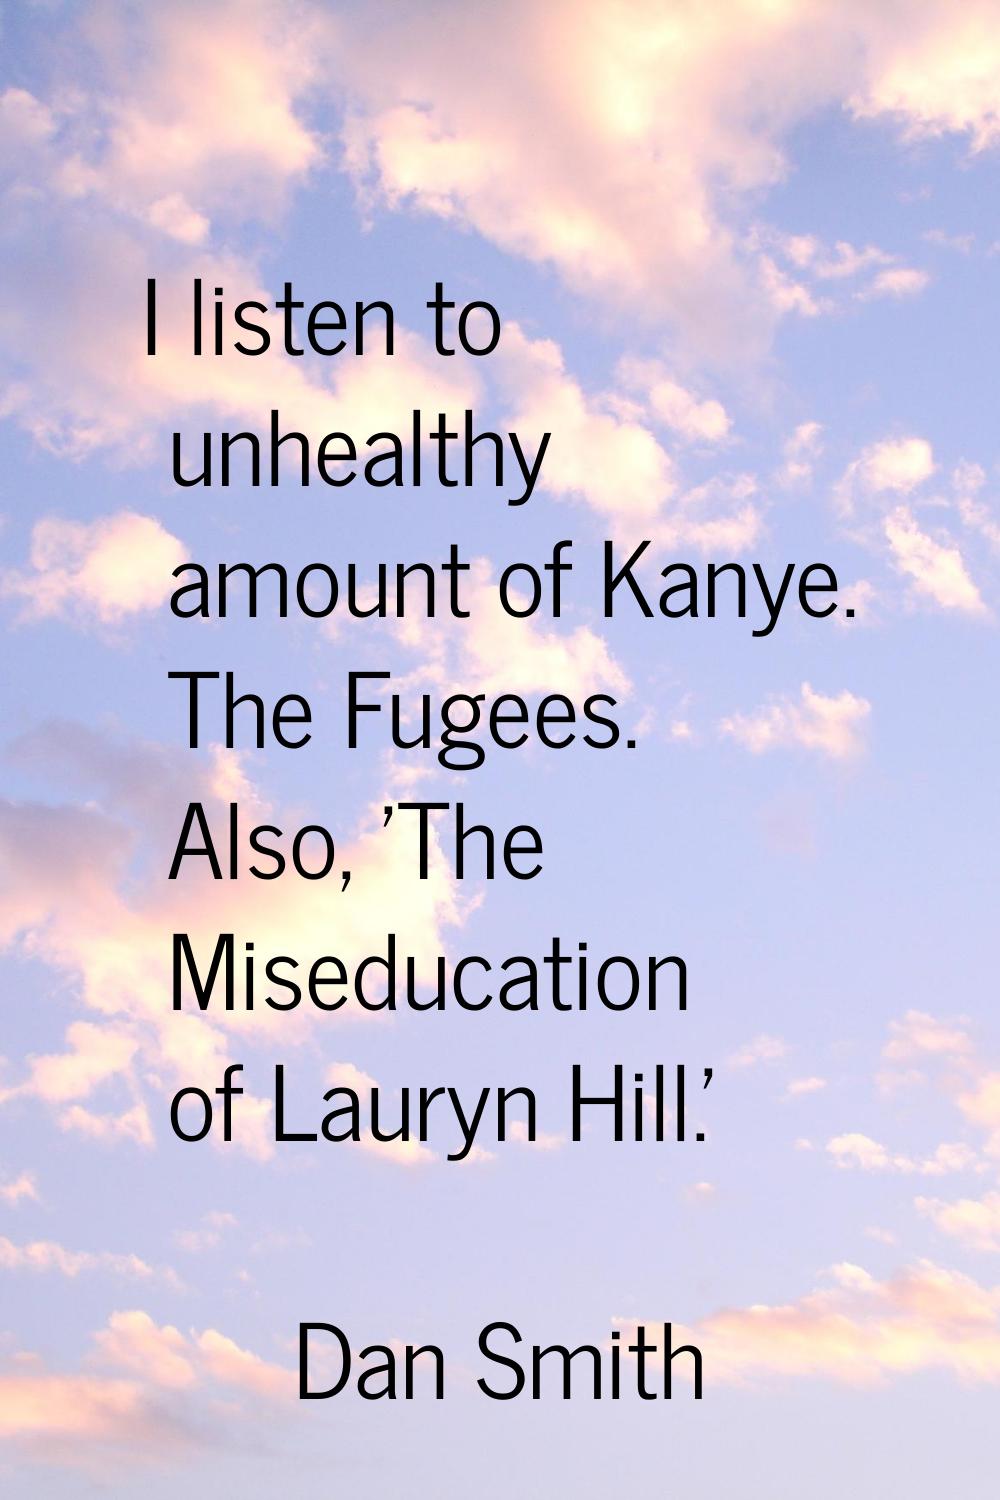 I listen to unhealthy amount of Kanye. The Fugees. Also, 'The Miseducation of Lauryn Hill.'